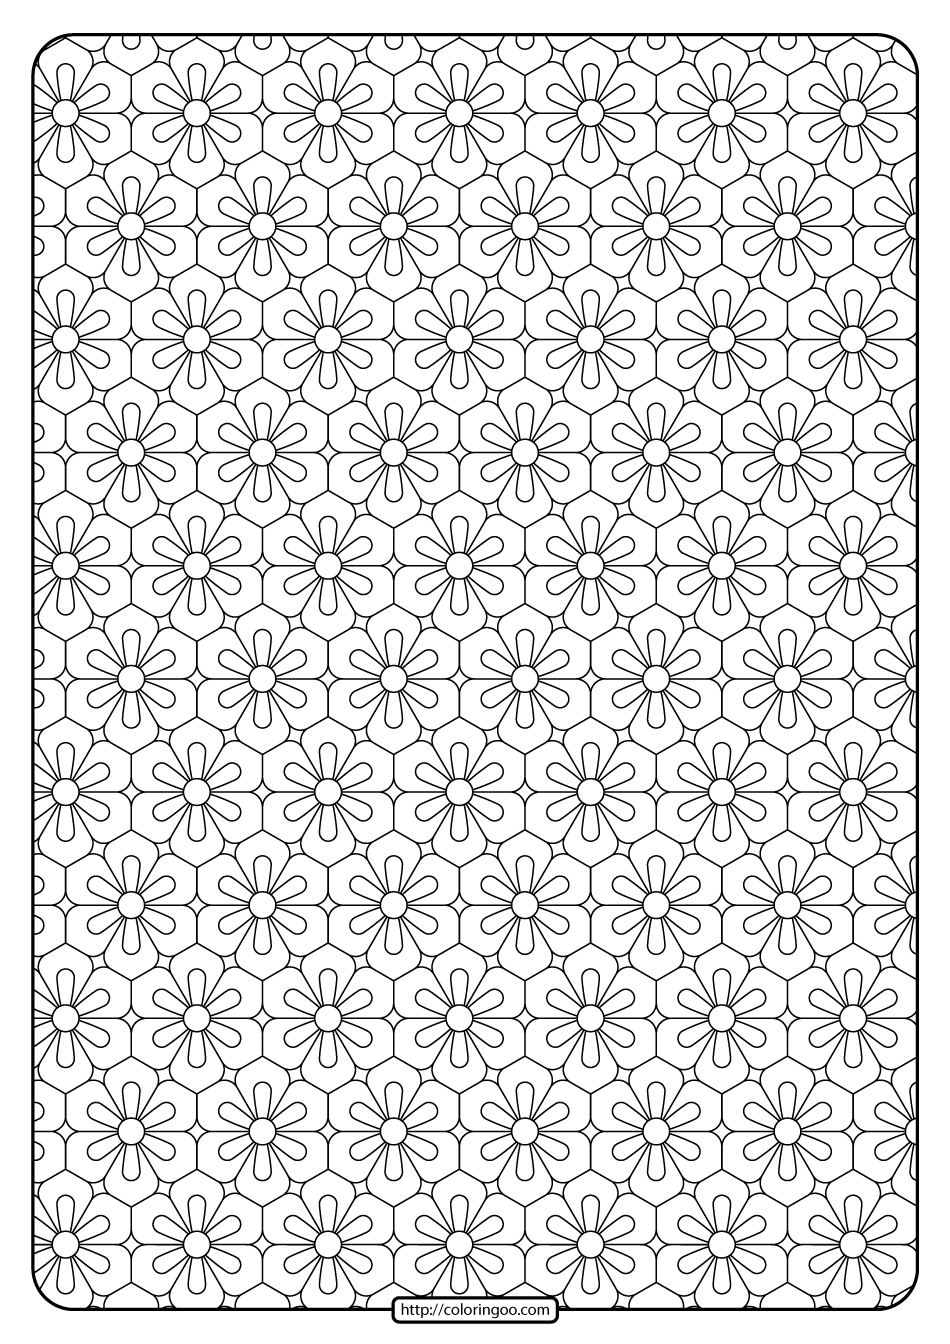 Printable Flower Geometric Pattern Coloring Page 02